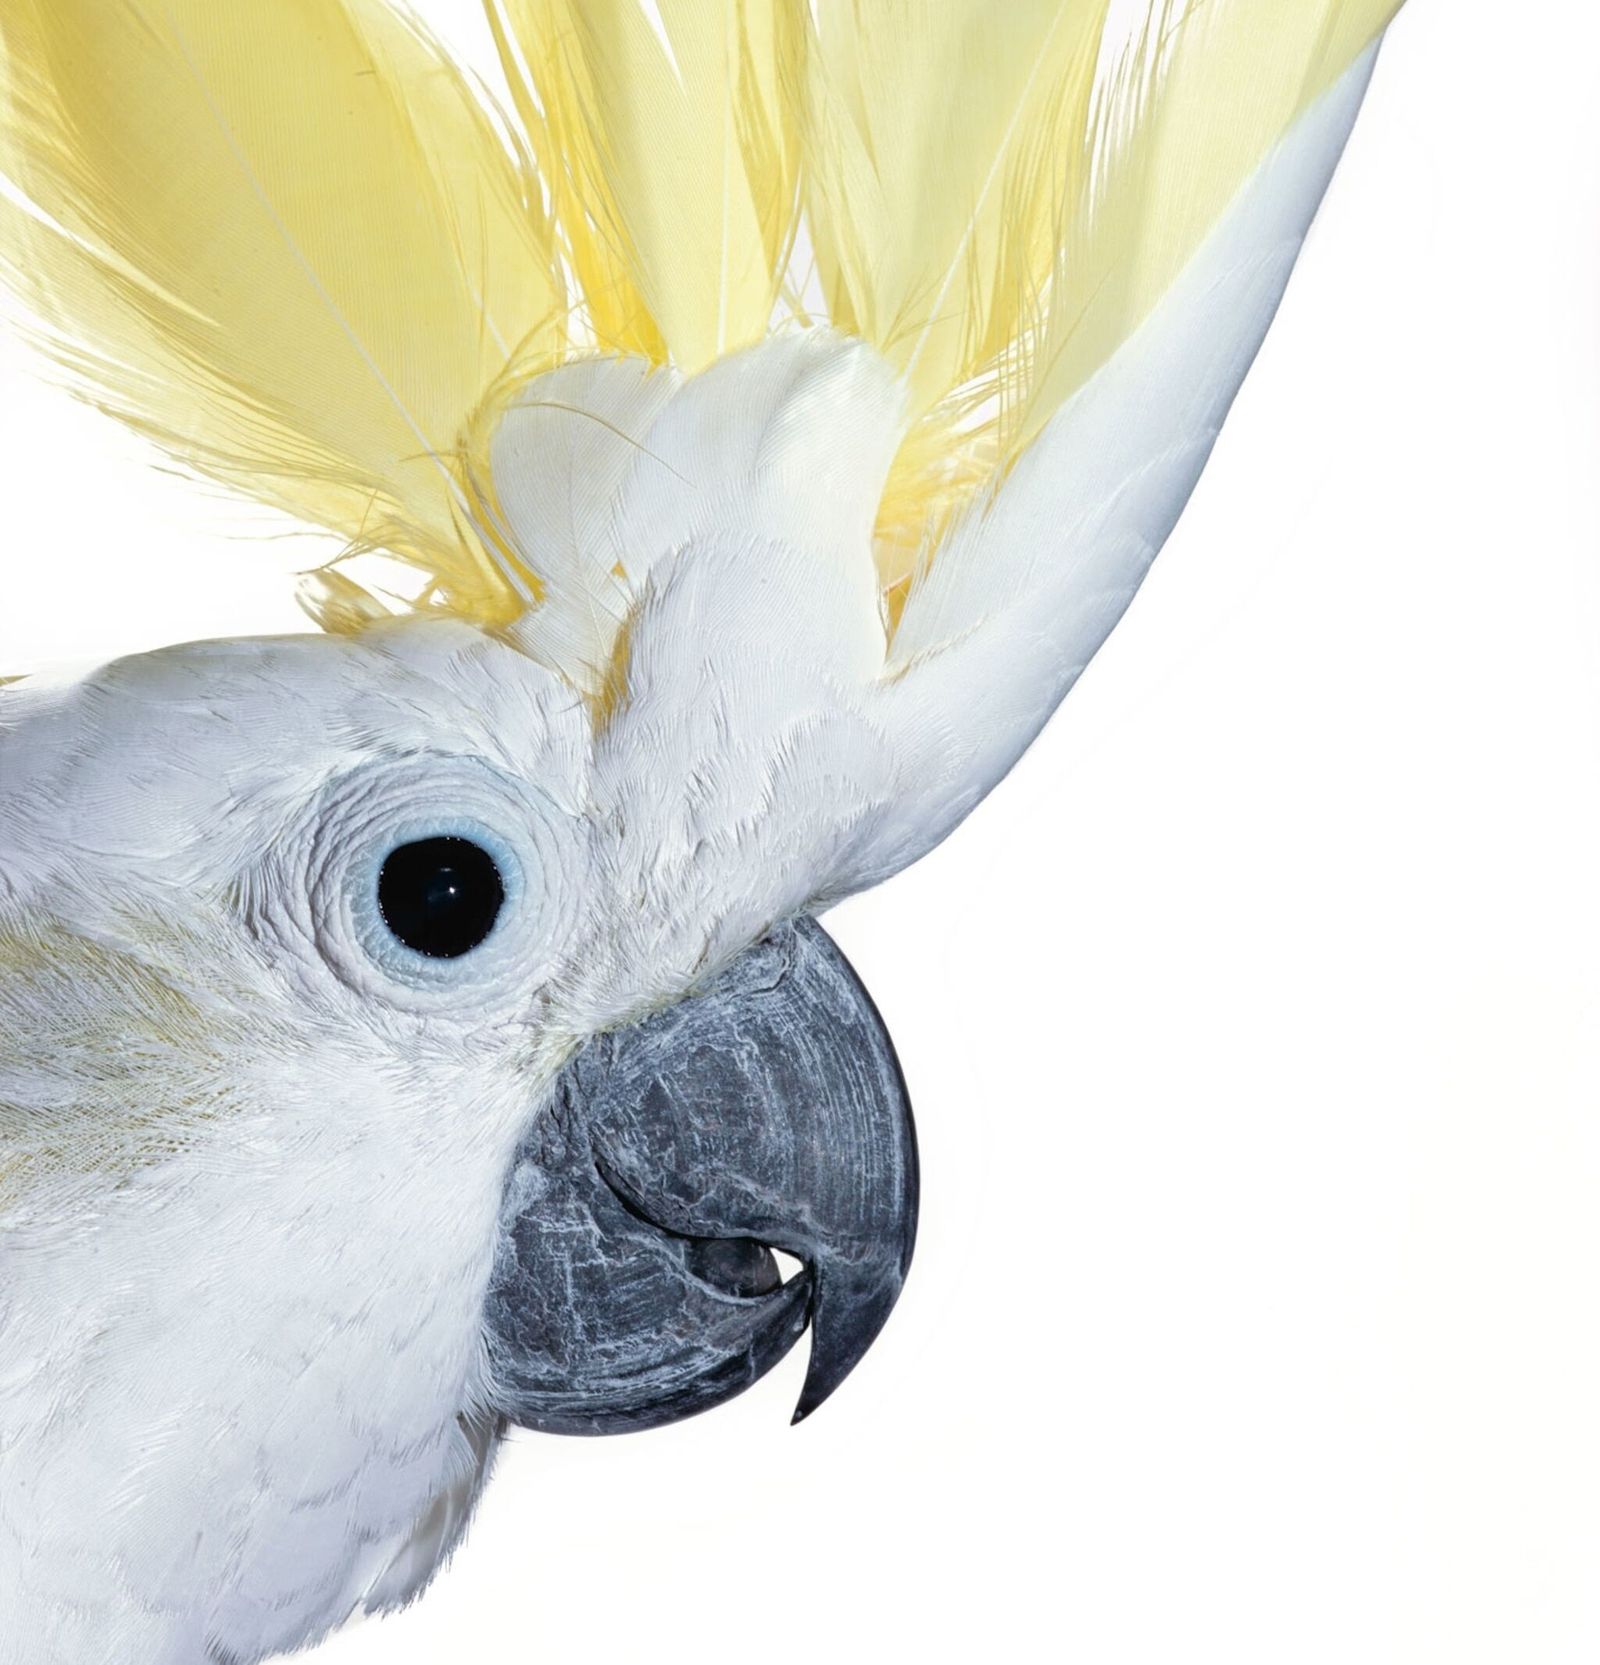 The Kings of Transcription: How does a cockatoo learn from its species?